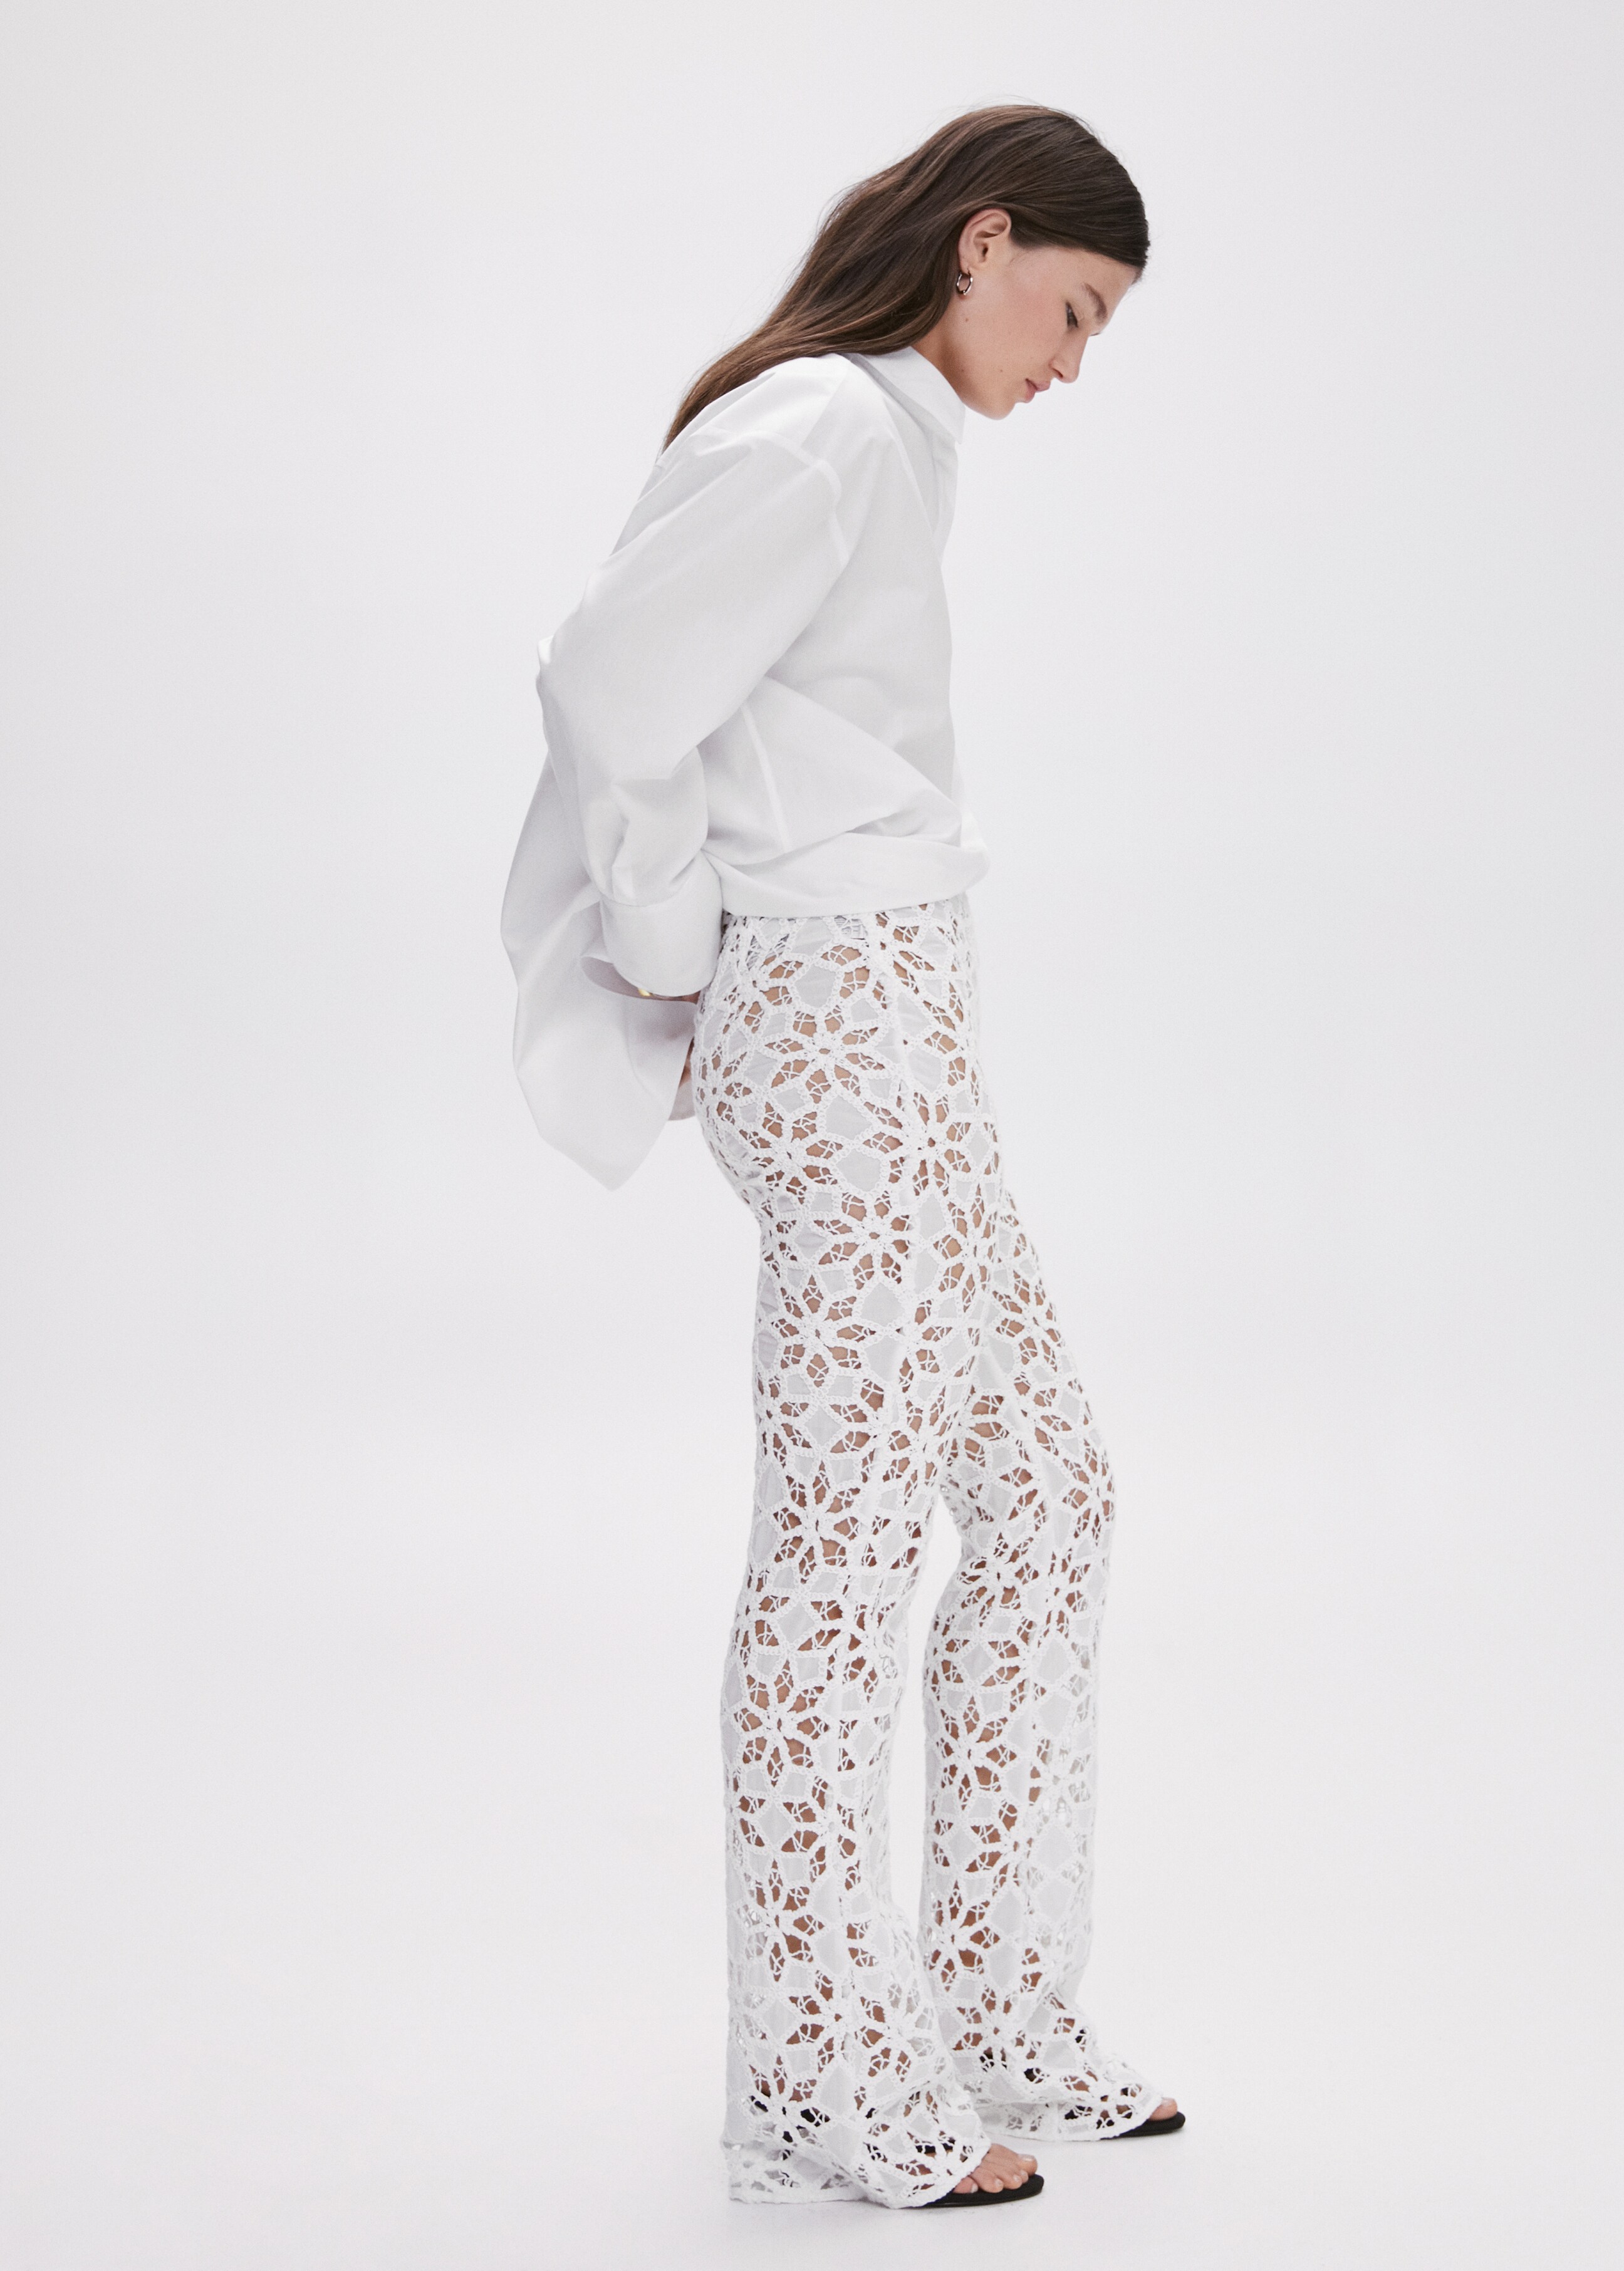 Crochet palazzo pants - Details of the article 2